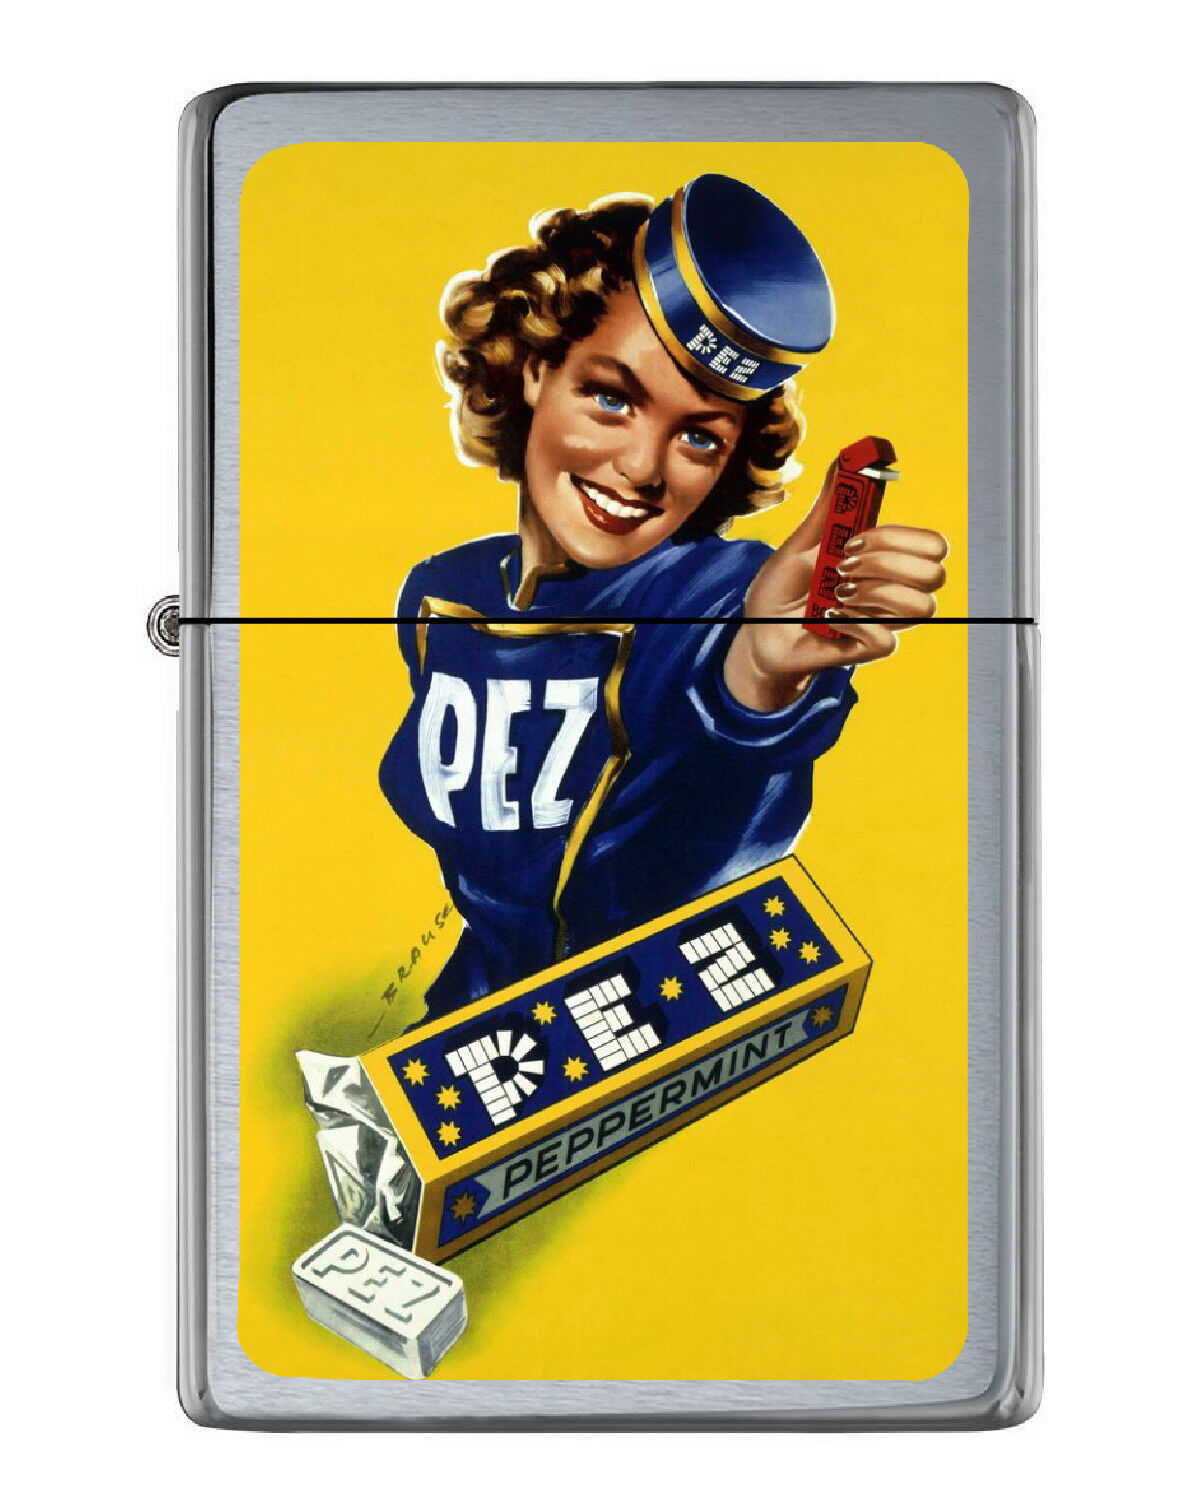 Retro Classic Pez Girl Poster Flip Top Lighter Brushed Chrome with Vinyl  Image.